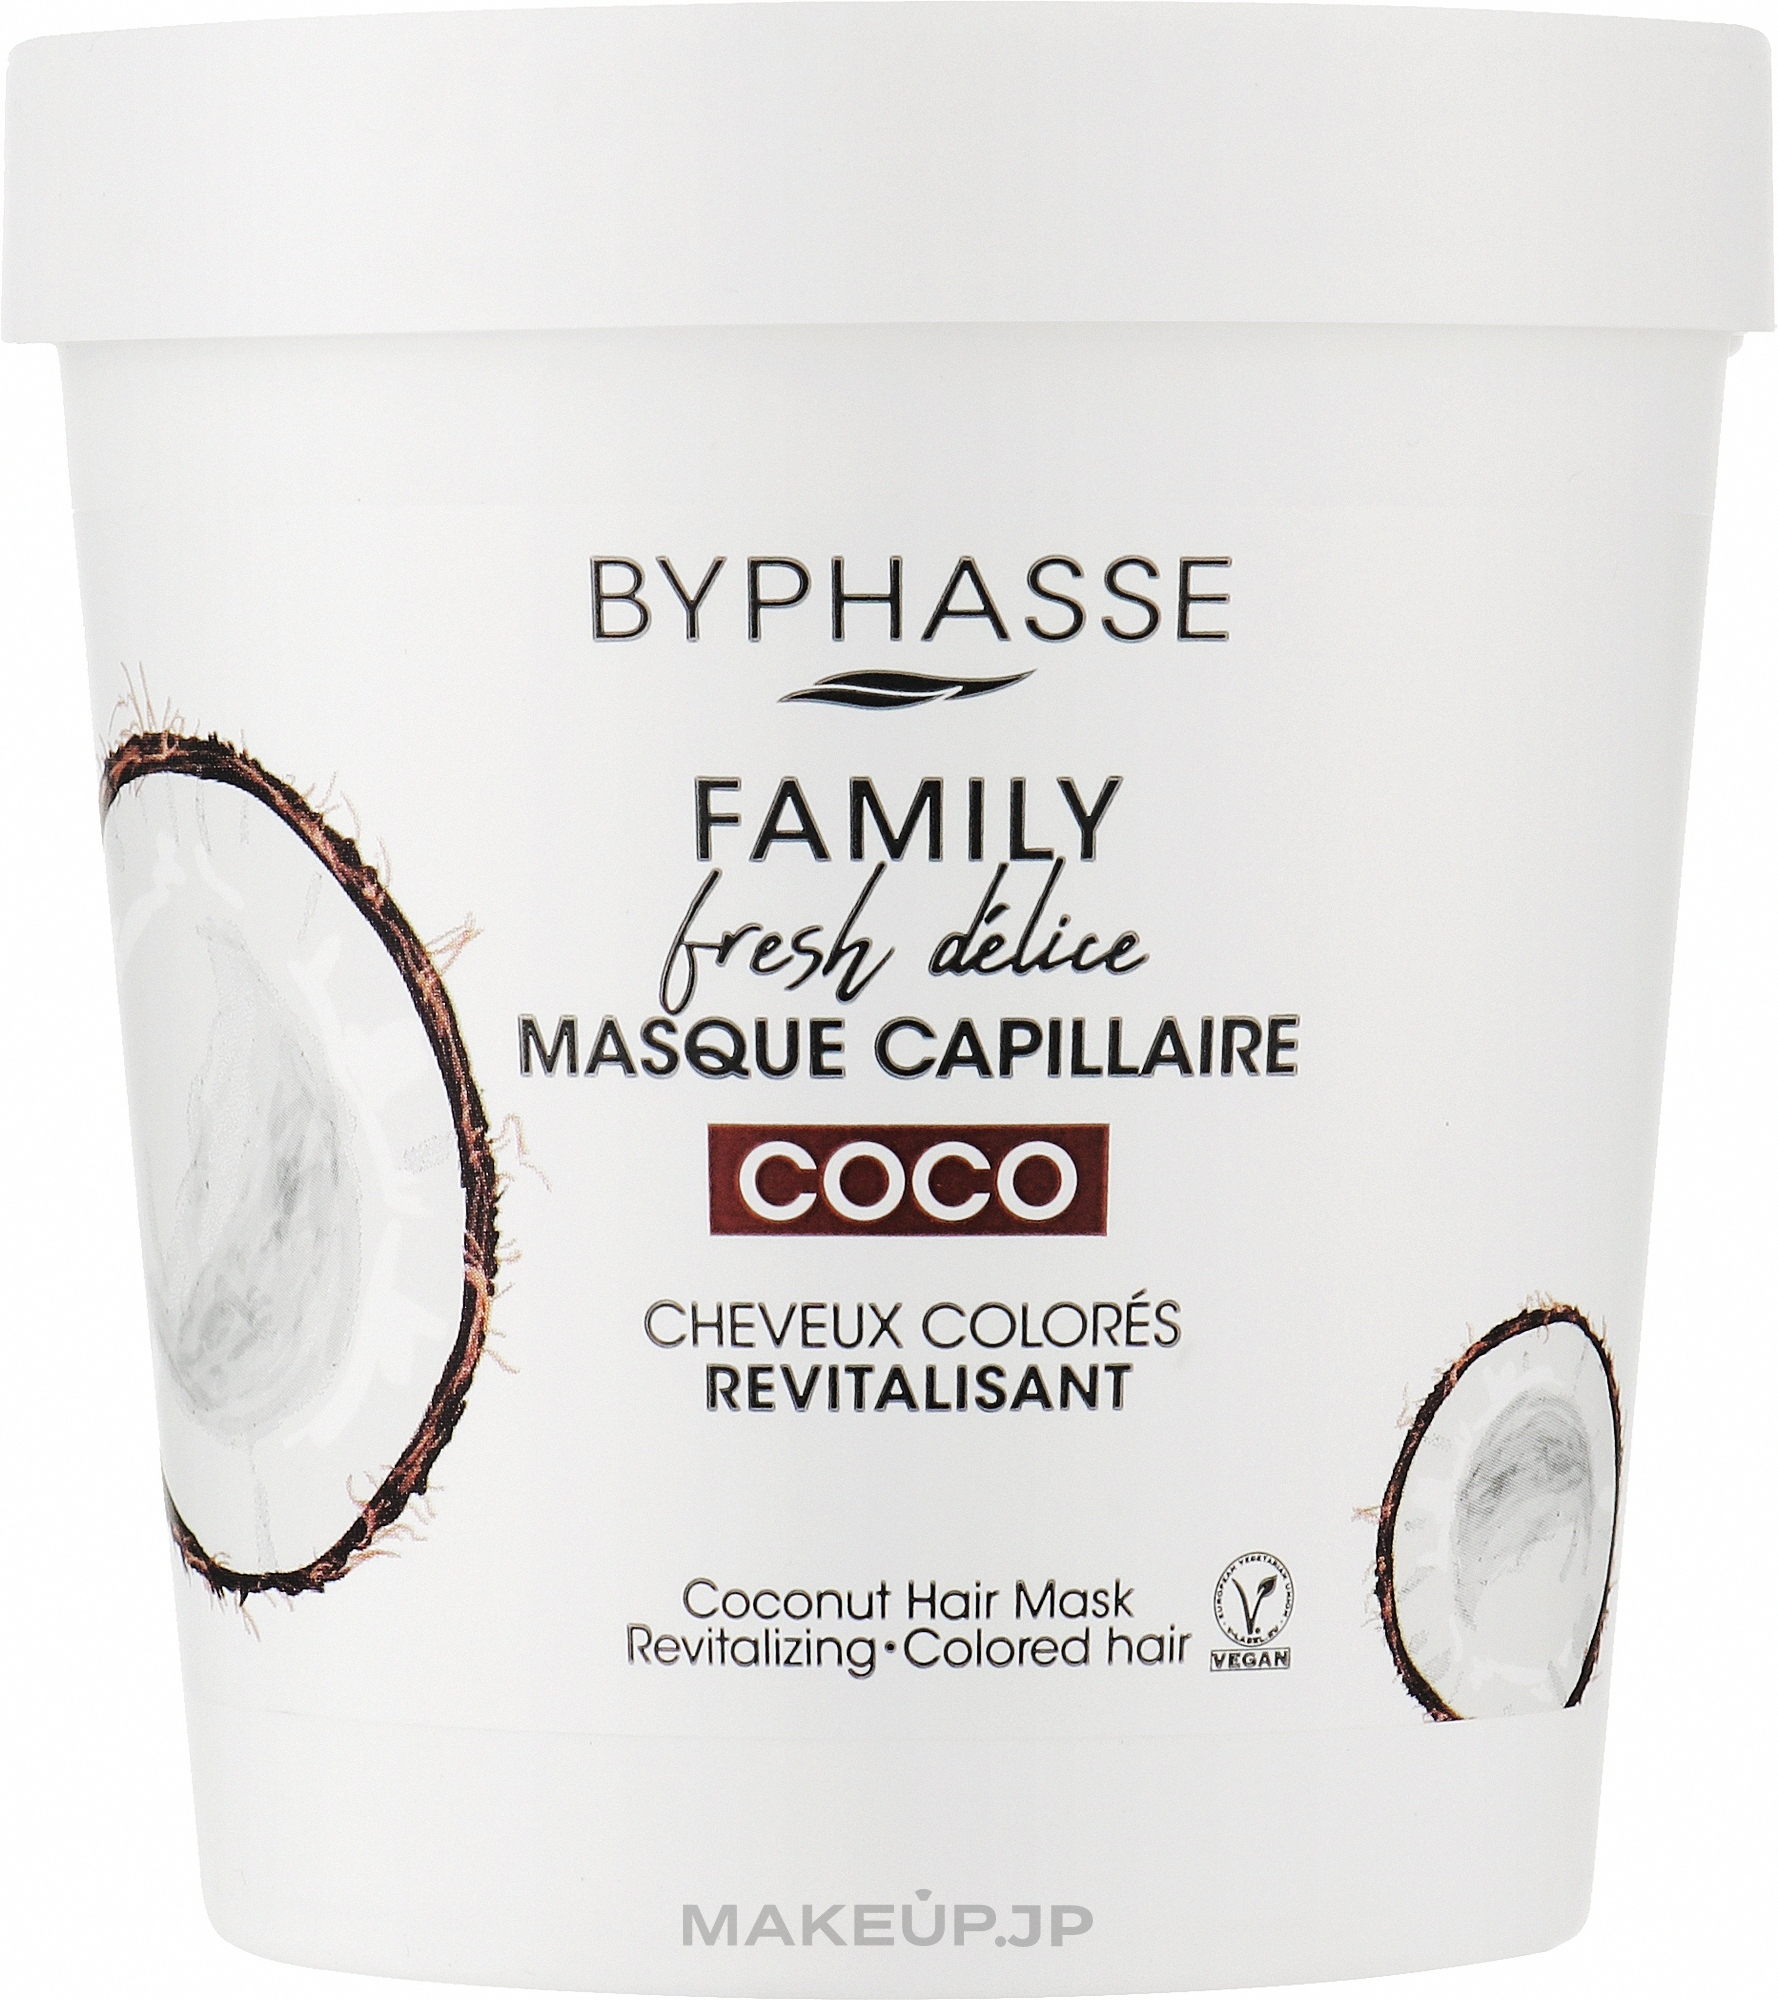 Coconut Mask for Colored Hair - Byphasse Family Fresh Delice Mask — photo 250 ml